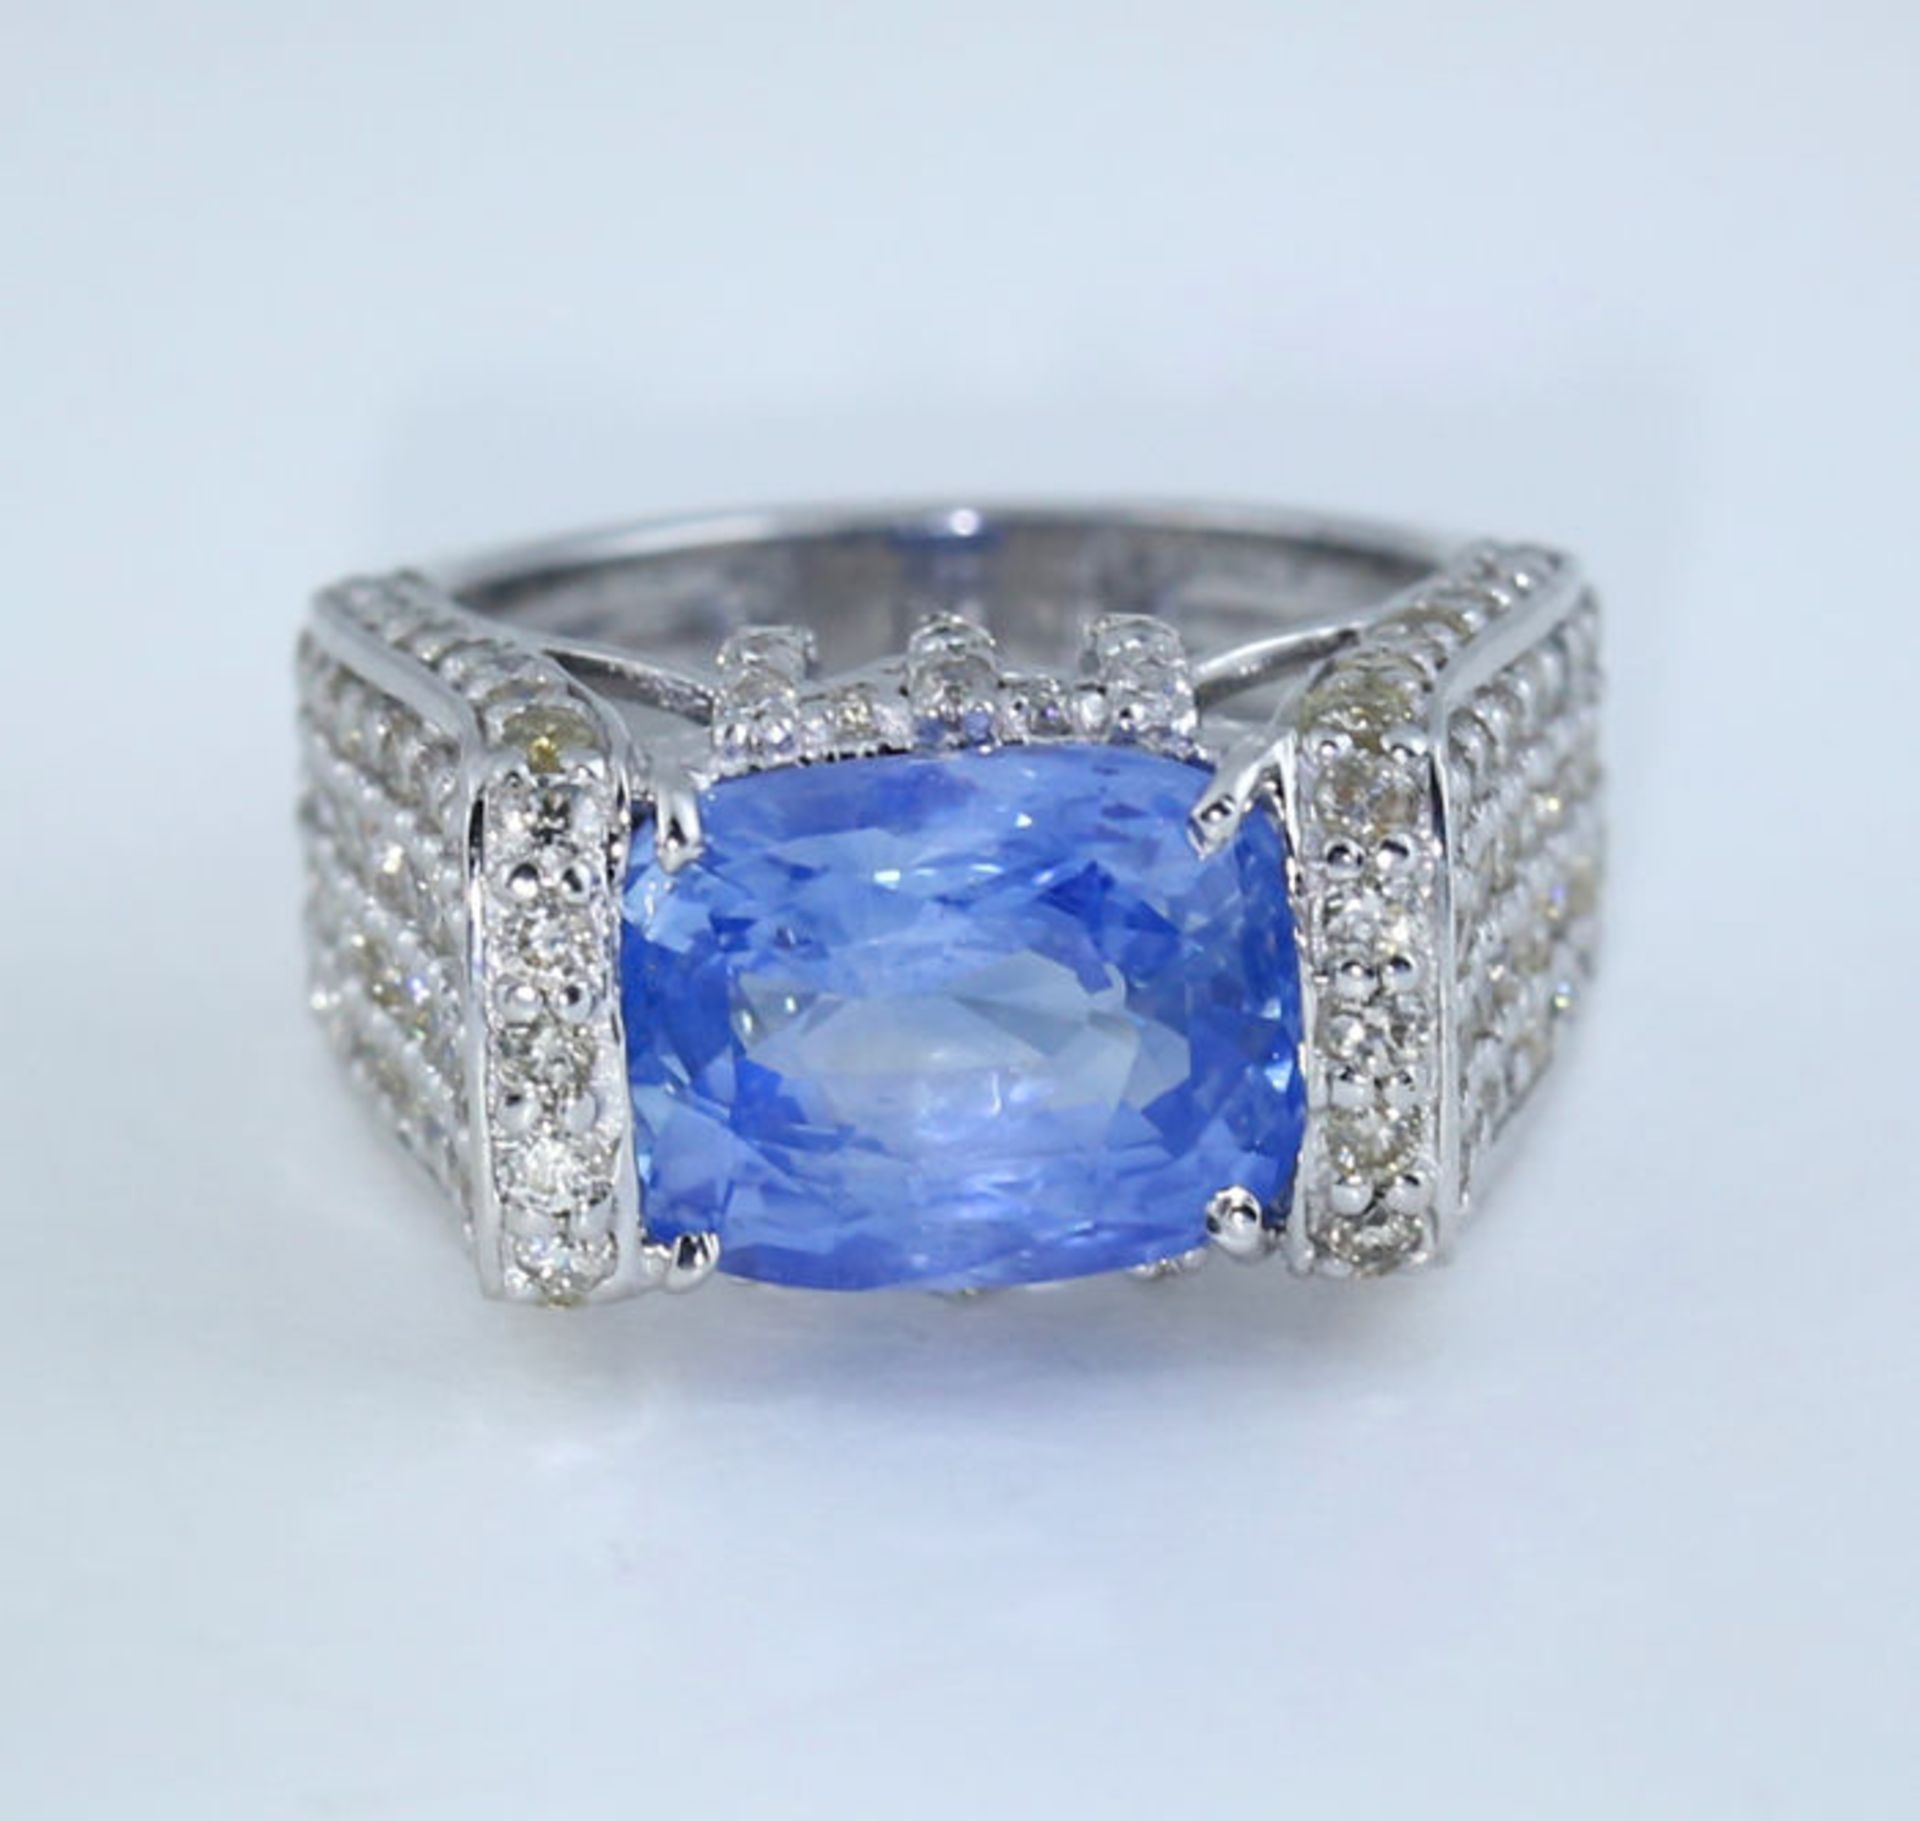 14 K / 585 White Gold Very Exclusive Designer Blue Sapphire (IGI certified) and Diamond Ring - Image 3 of 8